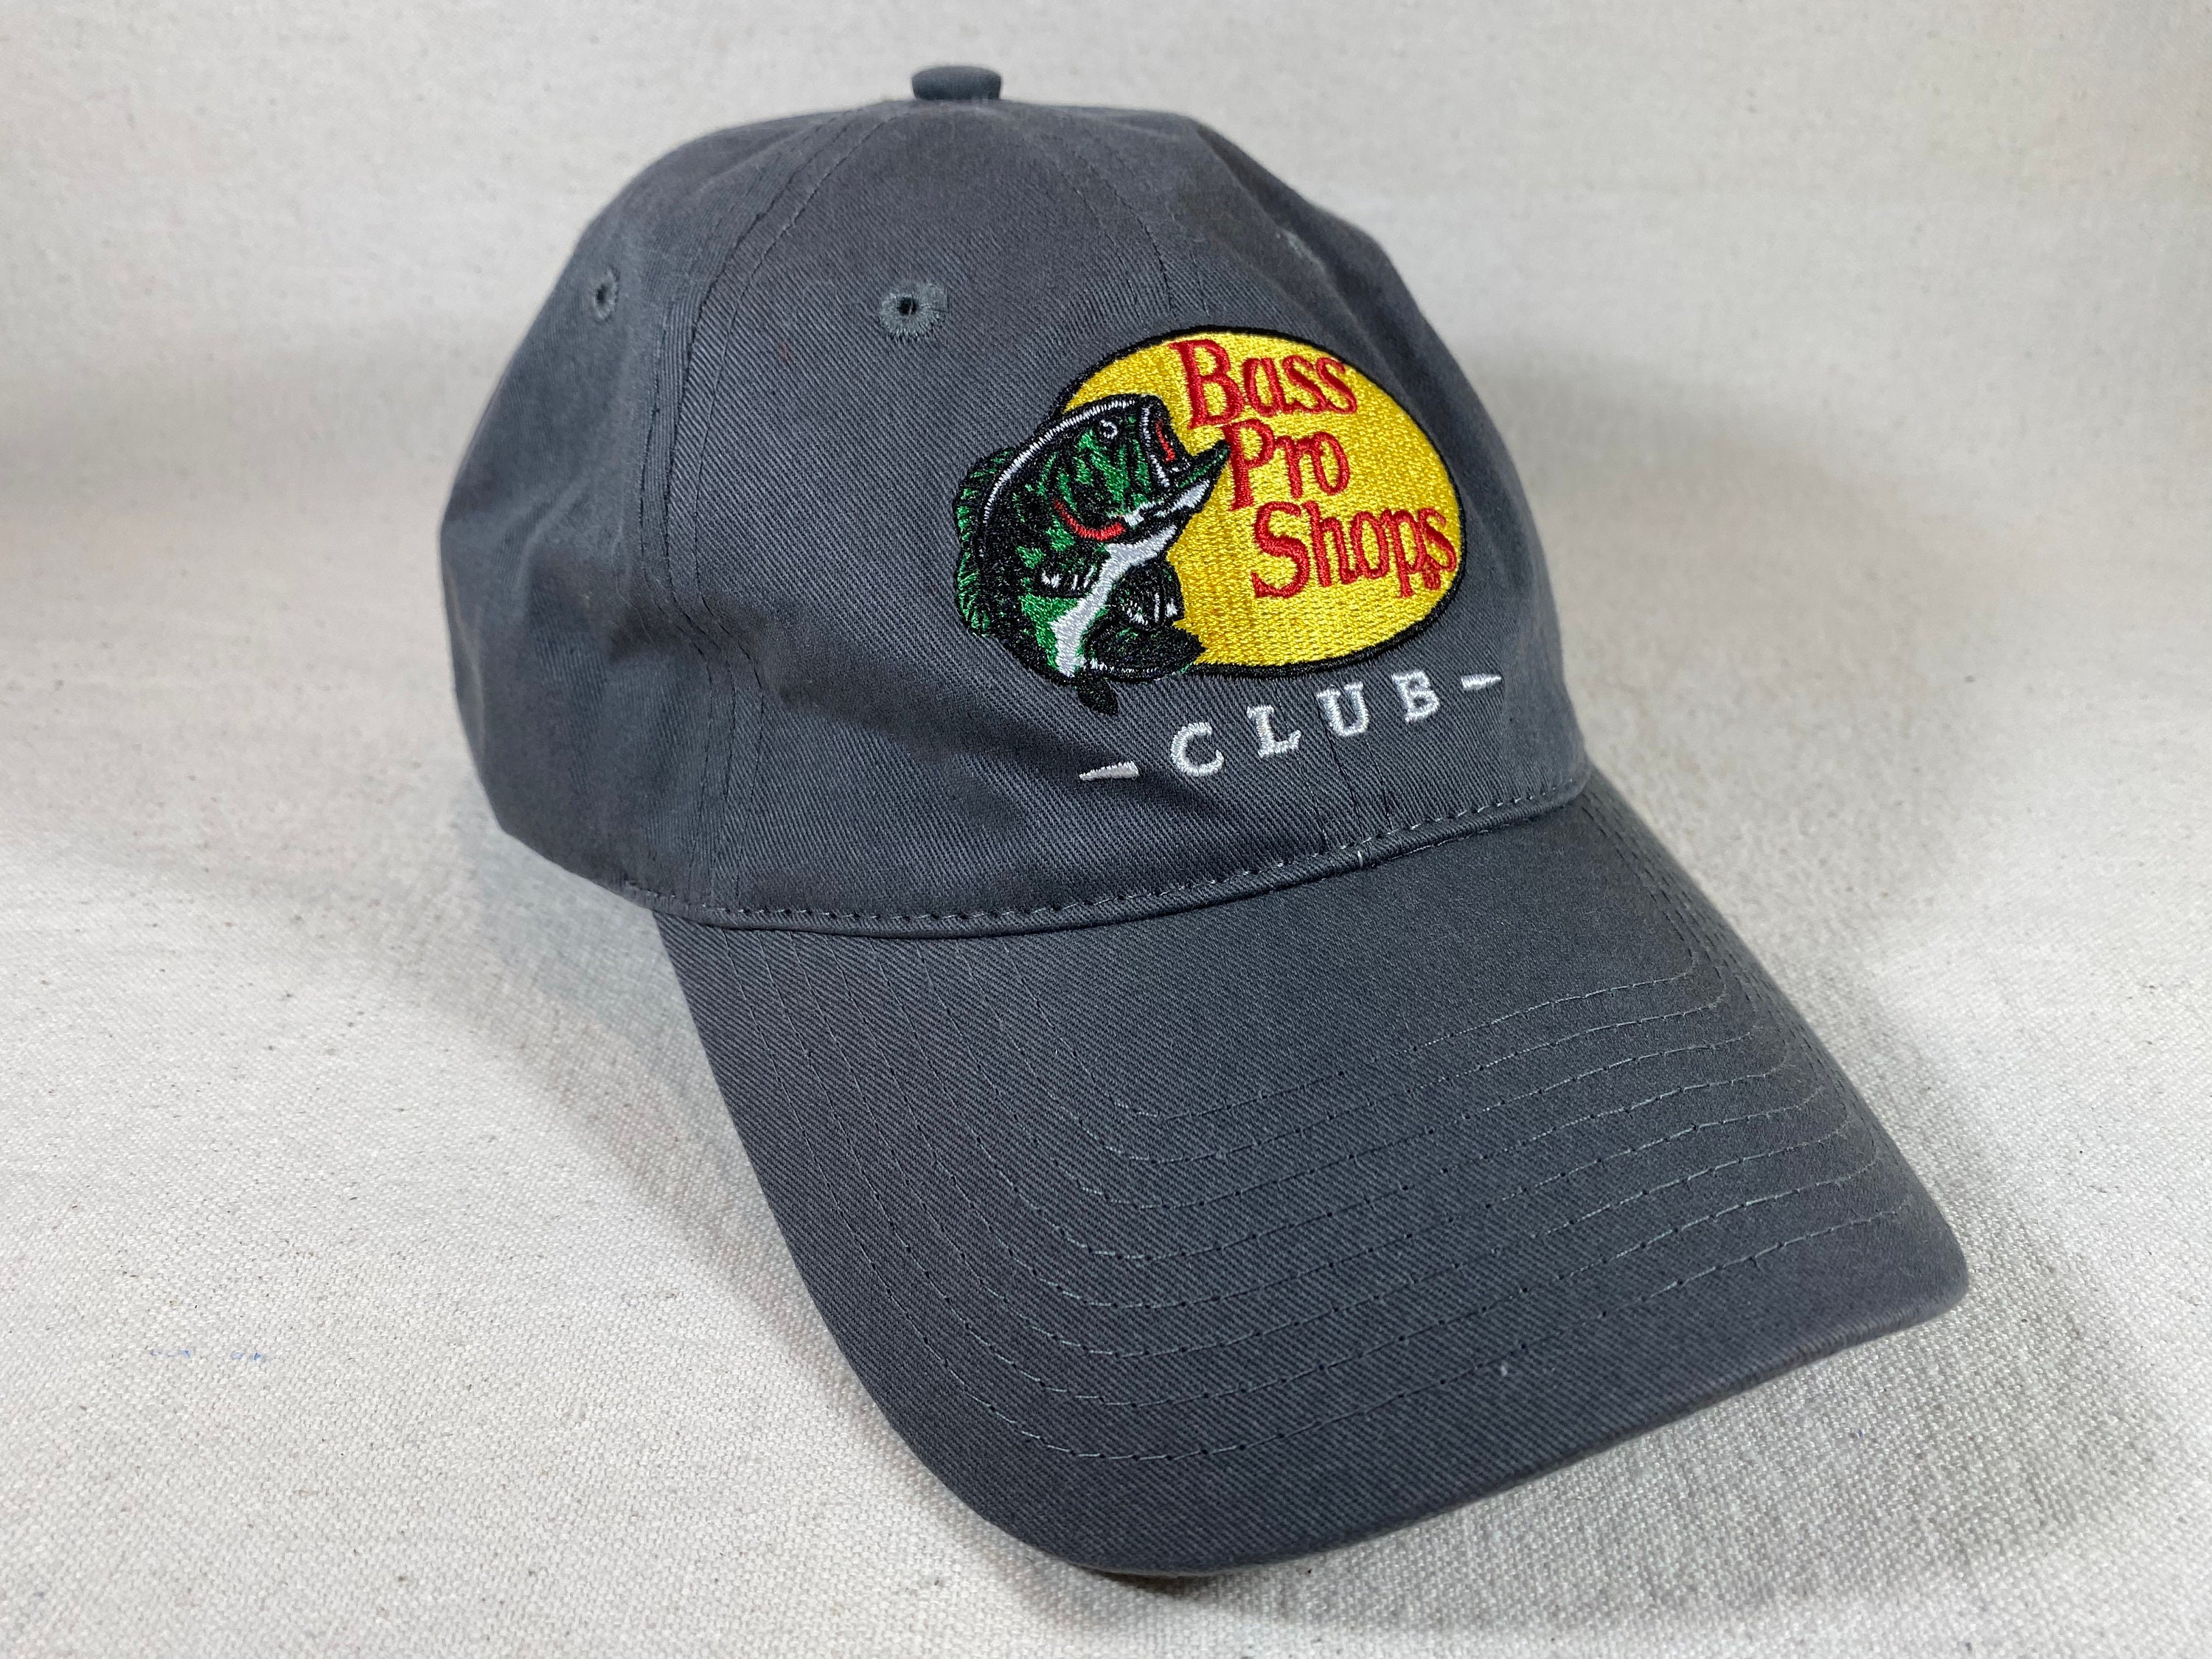 Bass Pro Shops Club Adjustable Cloth Embroidered Baseball Cap Hat